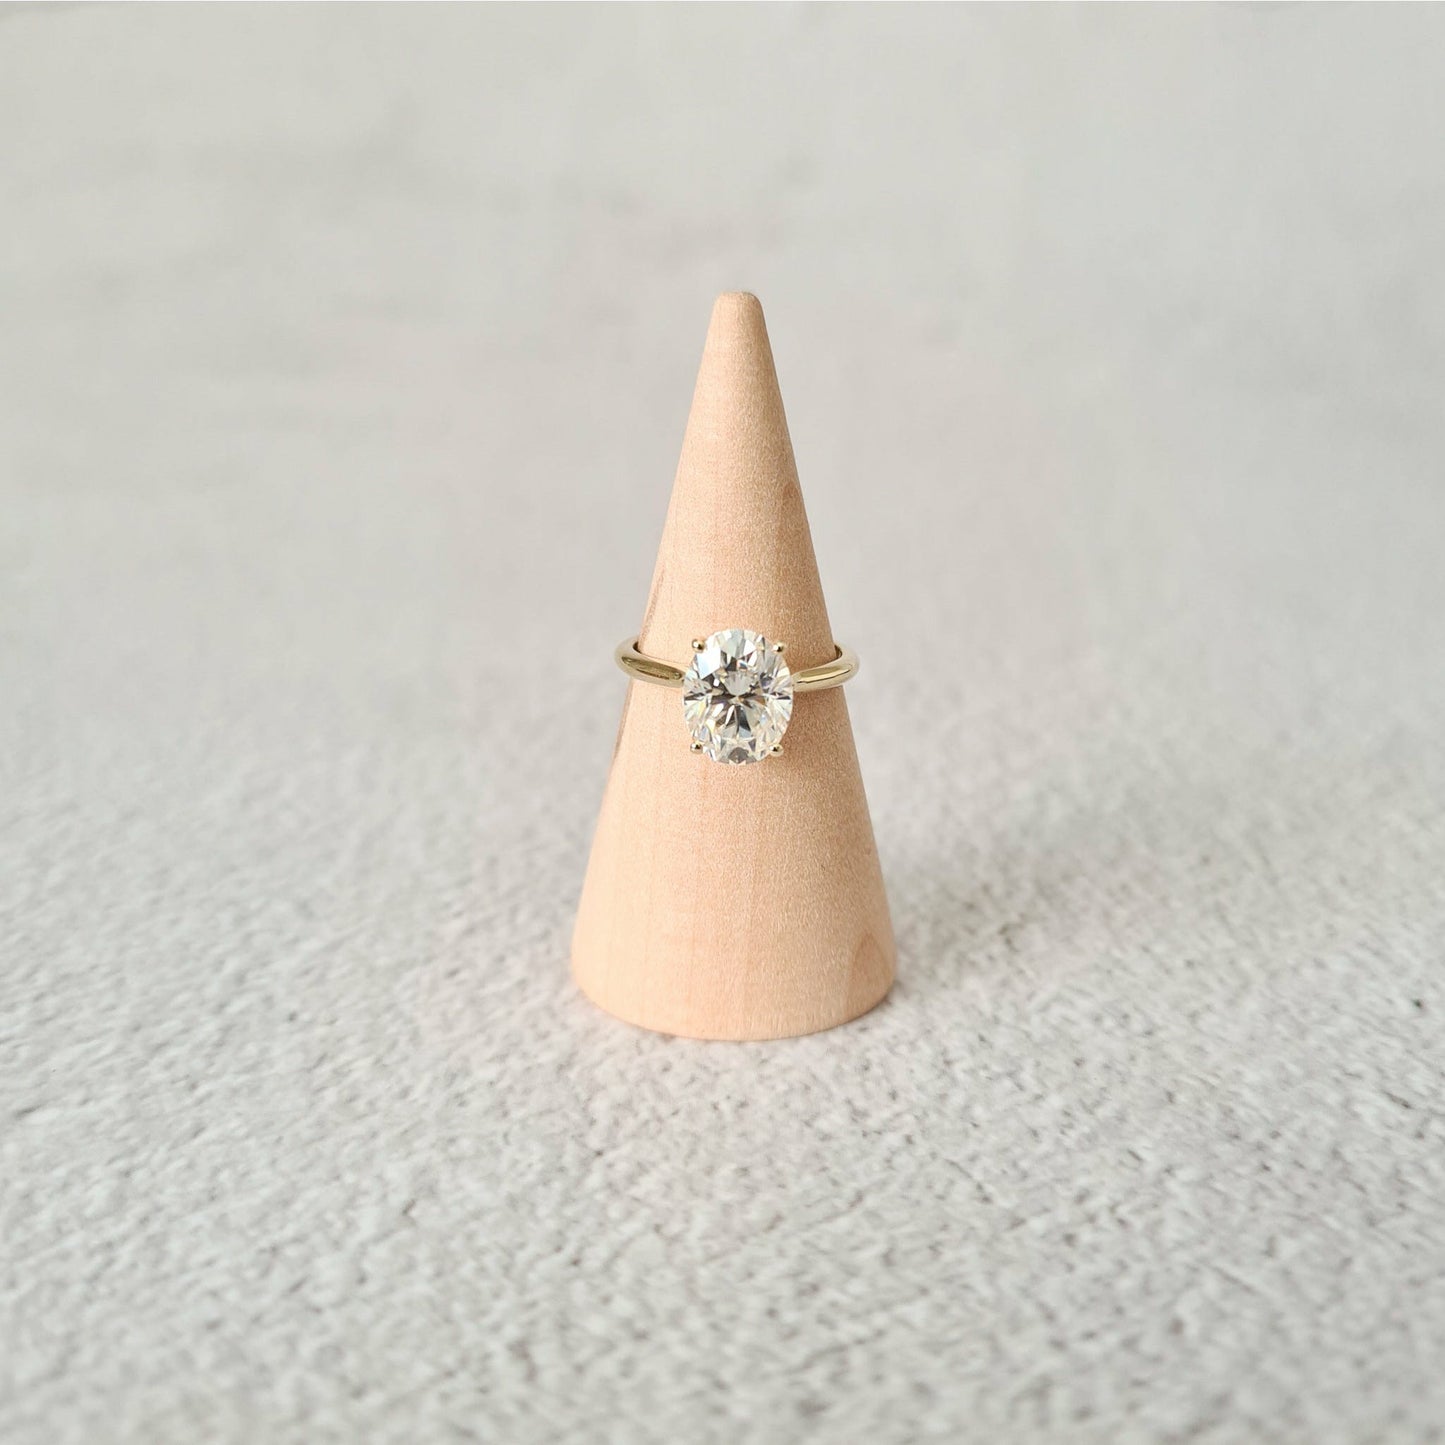 2ct oval moissanite solitaire engagement ring in 9ct yellow gold on a wood cone and grey background